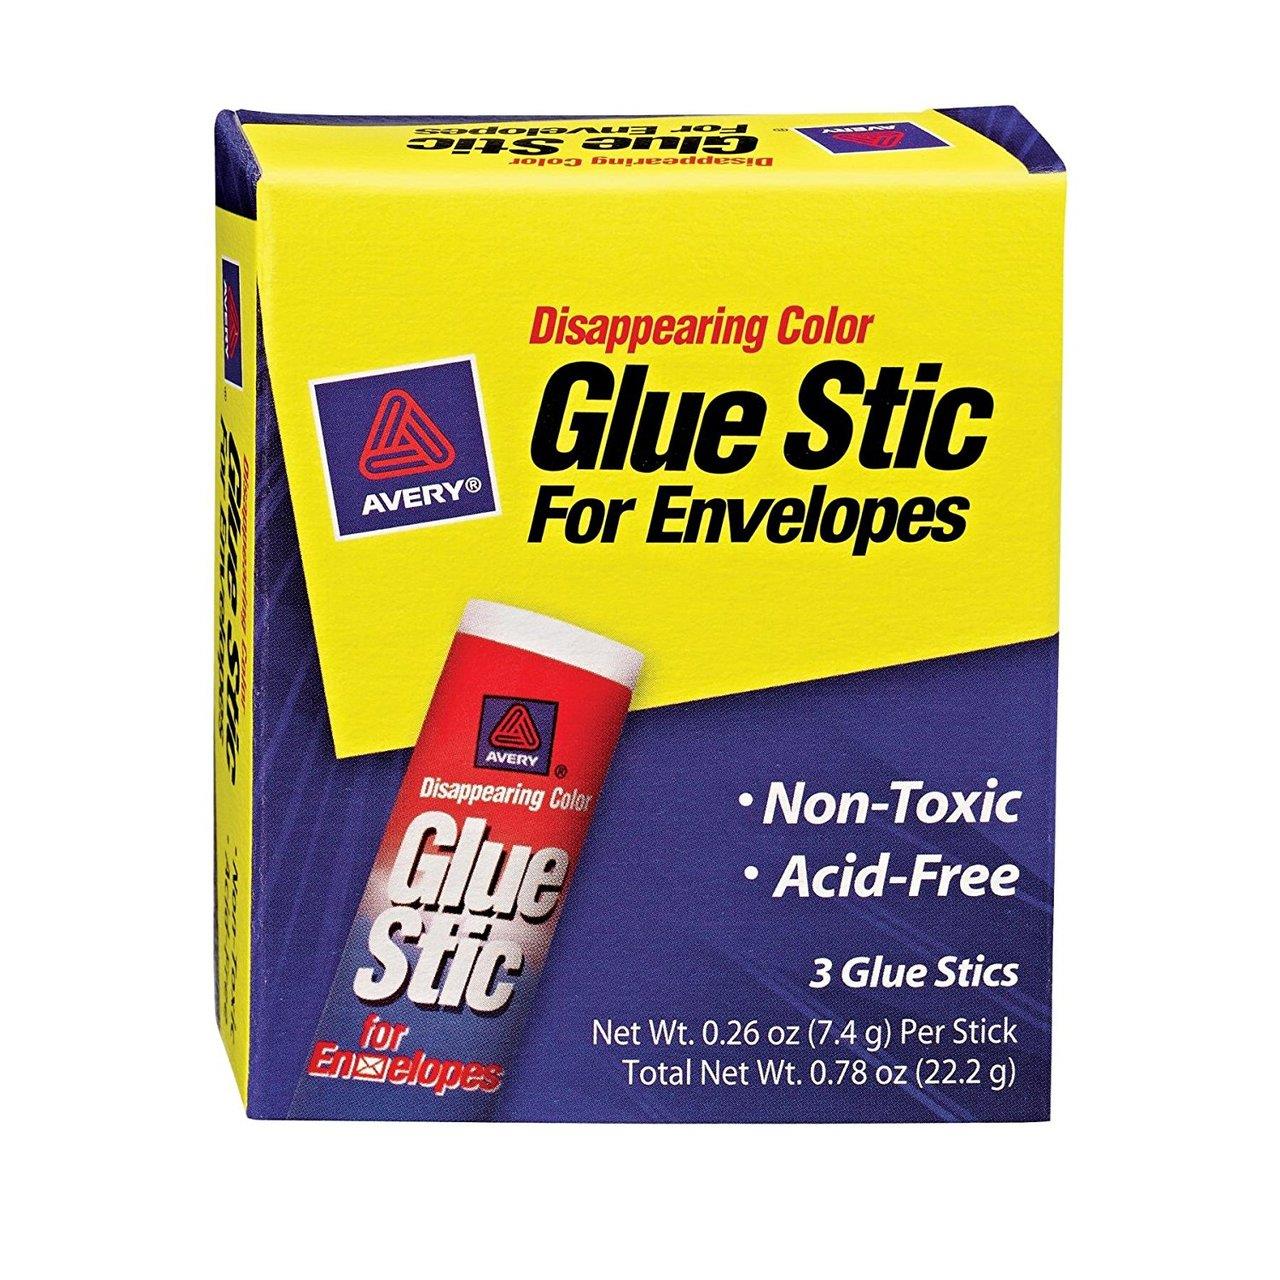 Bulk Disappearing Color Glue Stick For Envelopes, 0.26Oz, 3/Pk: Avery 00134  (36 Packs of 3 Glue Sticks) - Myriad Greeyn Office Supplies - Disabled  Veteran Owned SDVOSB, AbilityOne Distributor